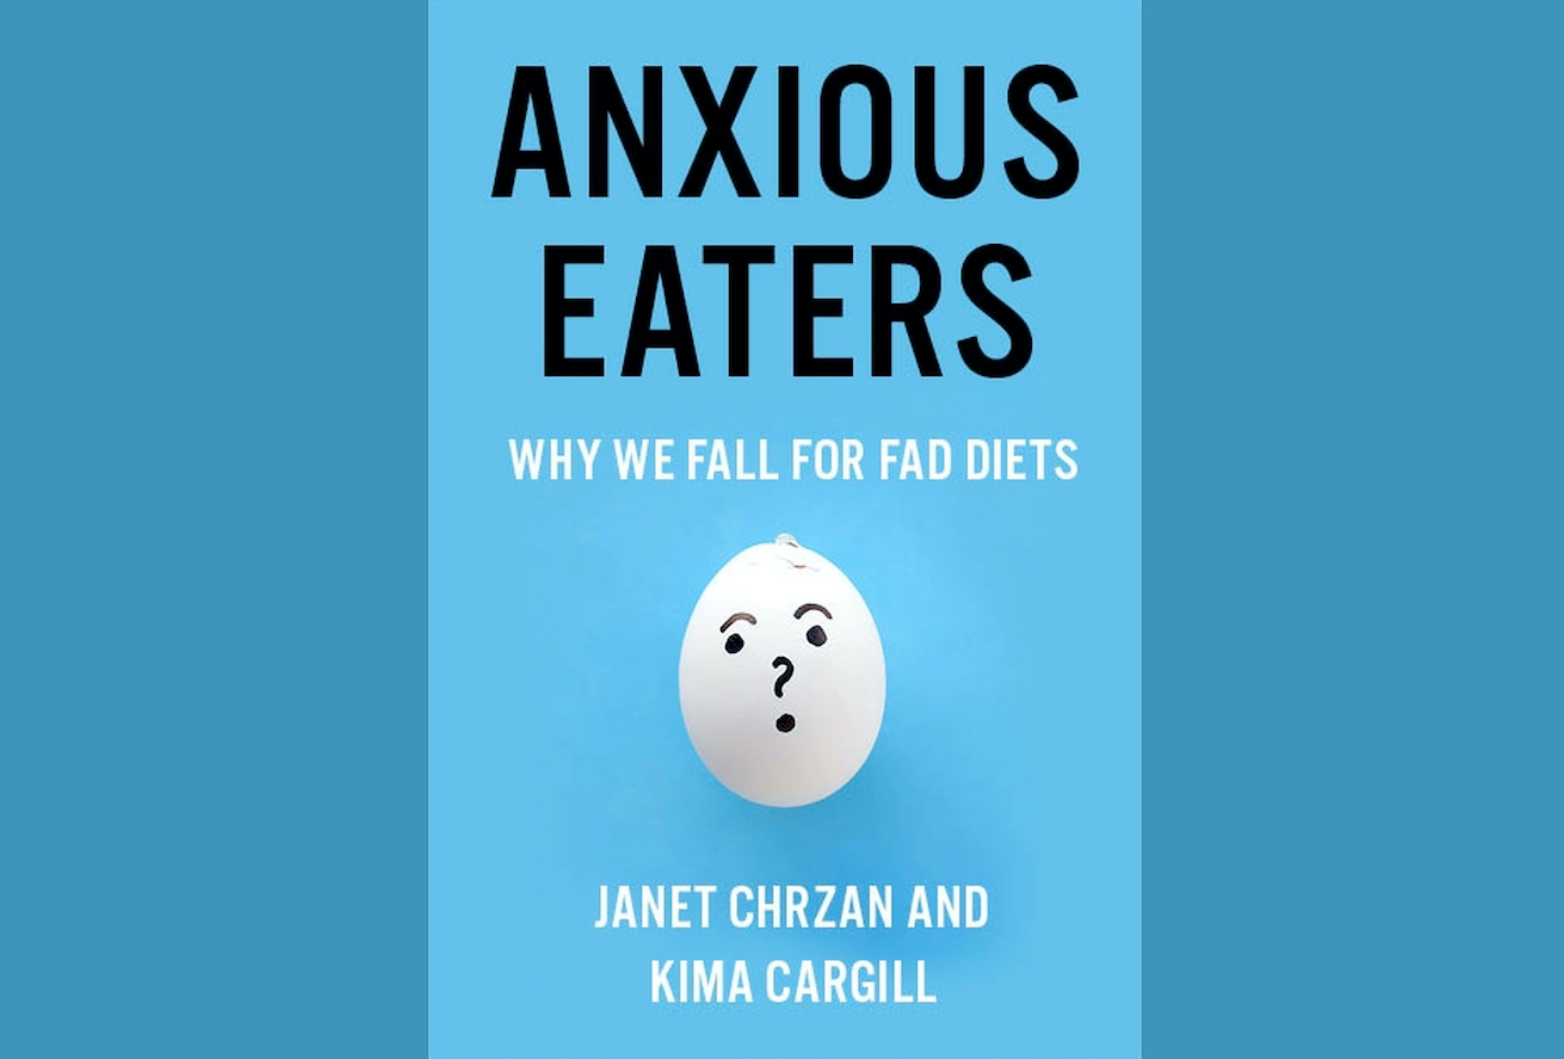 Book cover with the title, "Anxious Eaters: Why we fall for fad diets," by Janet Chrzan and Kima Cargill